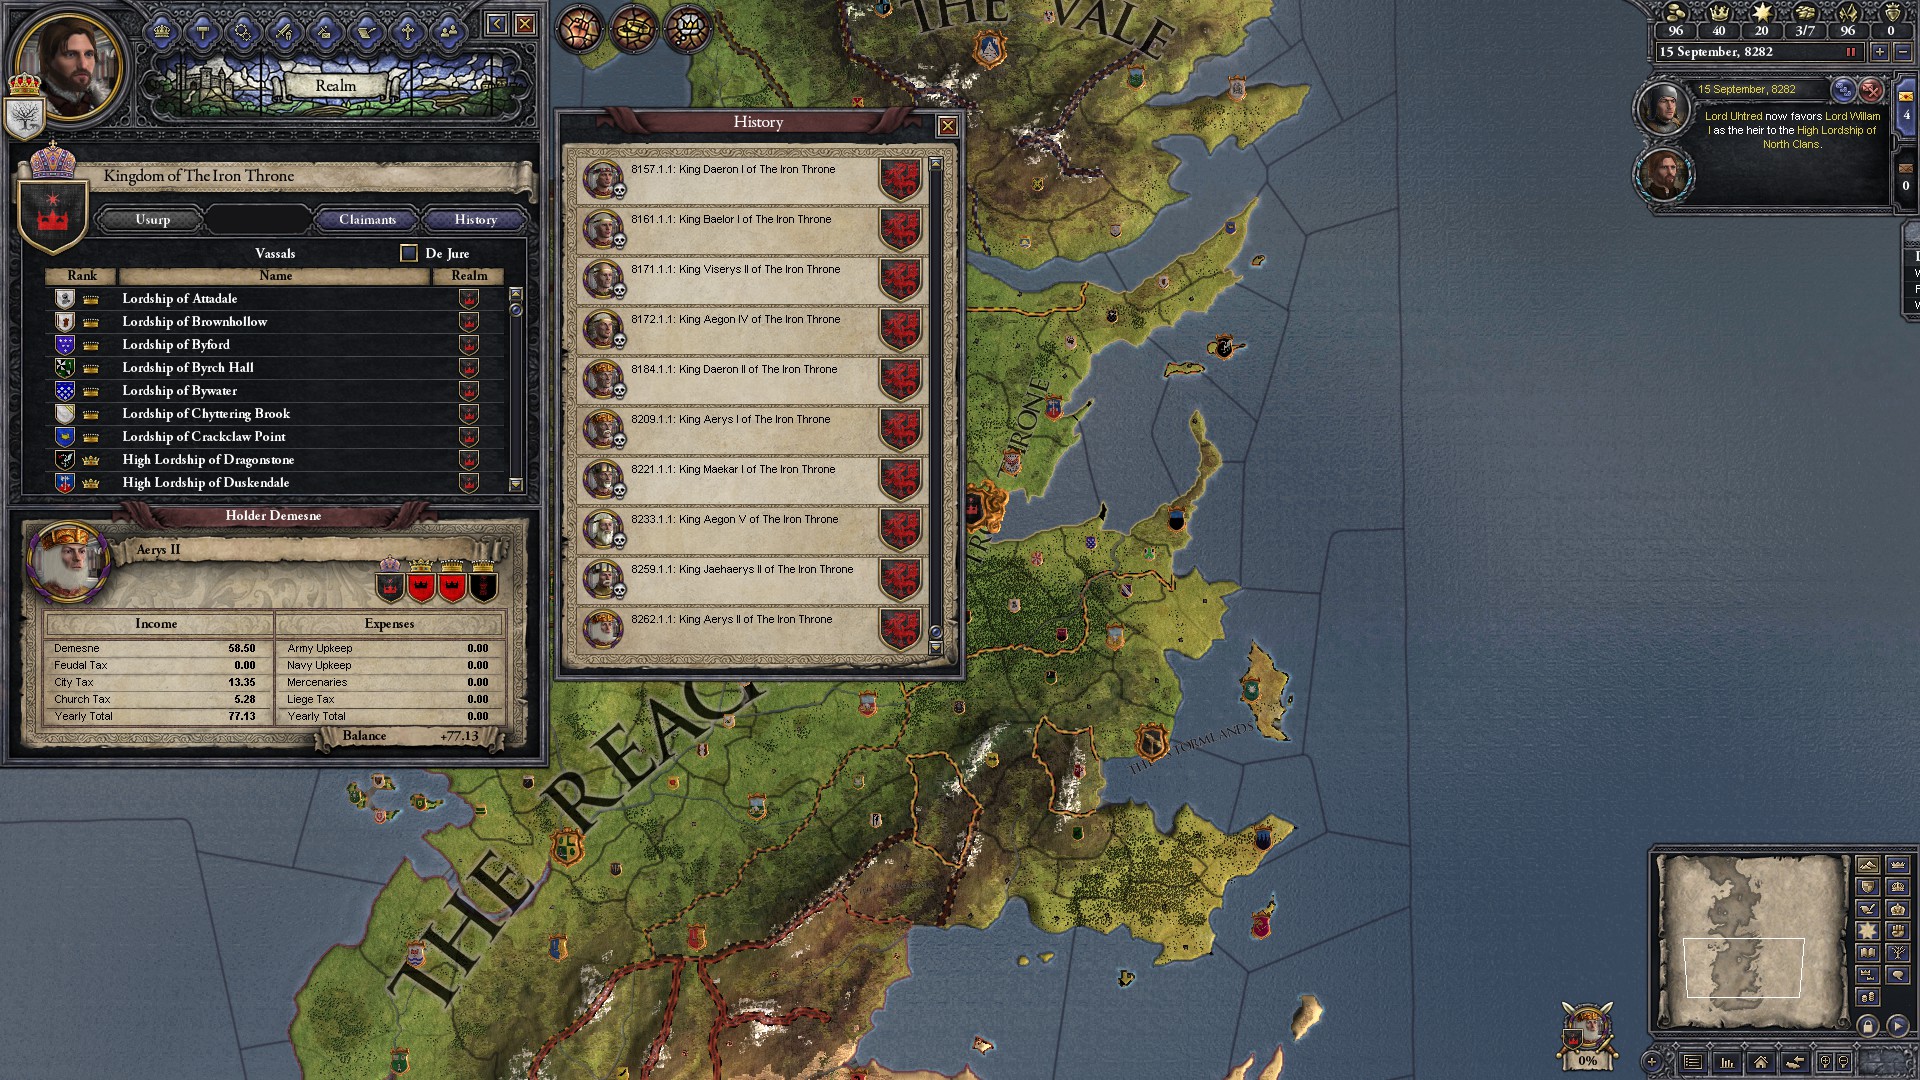 The Perfect Game Of Thrones Video Game Already Exists